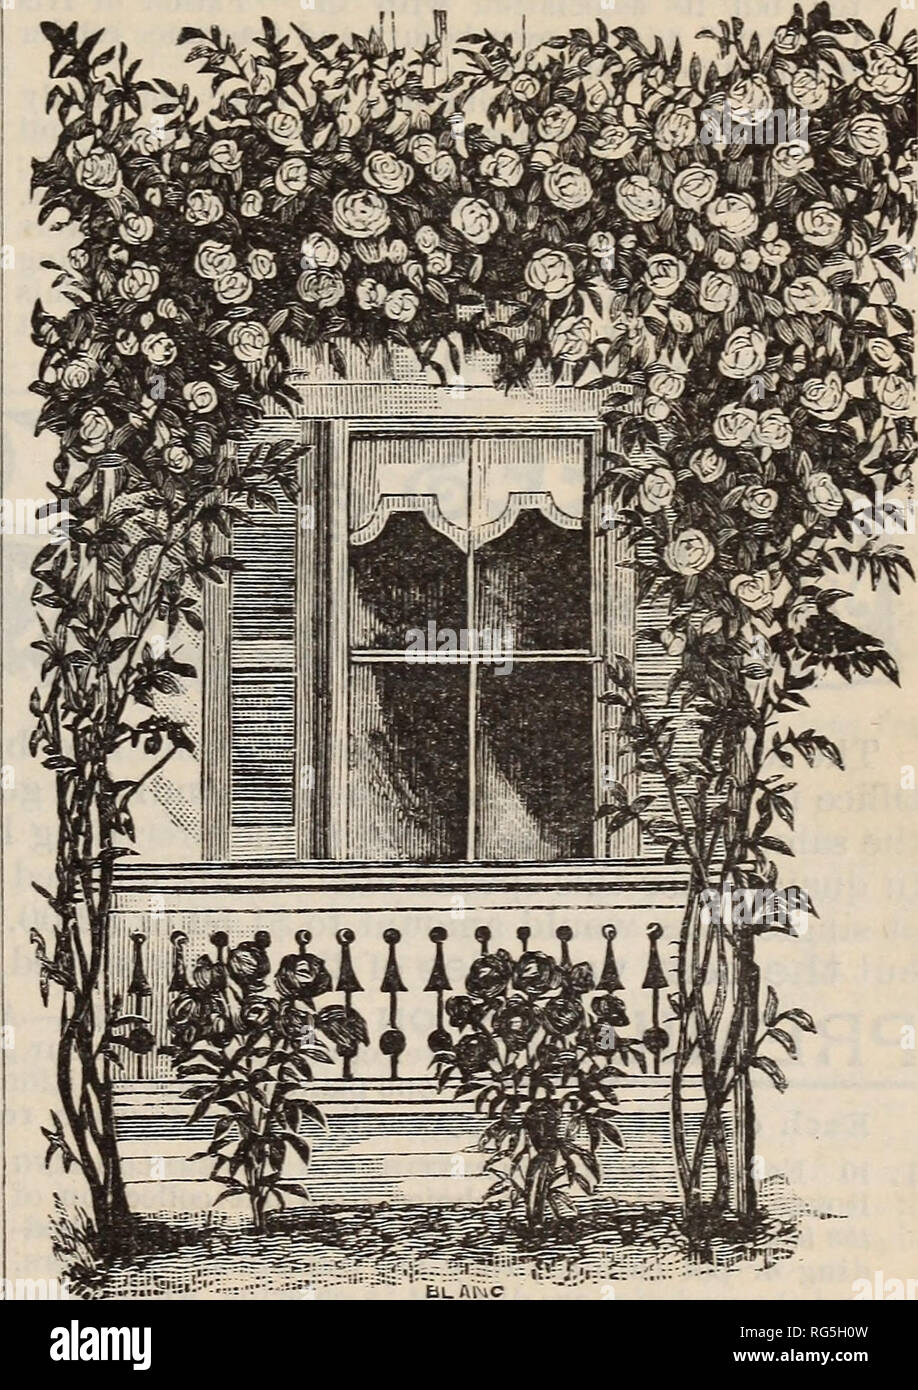 . Burpee's farm annual, 1892. Nursery stock Pennsylvania Philadelphia Catalogs; Flowers Catalogs; Vegetables Catalogs; Seeds Catalogs. BURPEE'S LIST OF PLANTS. 153 EVER-BLOOMING ROSES.—Continued. Lady Stanley. A beautiful chamois red, shaded with terra-cotta; buds long aud pointed ; free bloomer. Luciole. A very distinct and beautiful rose; large full double buds and flowers; the petals are rieli golden yellow, tinged and edged with cherry red. Mil Claudlne Perreaa. Beautiful rosy flesh with rich crimson center, large and double; a strong and vig- orous grower. Madame de Watteville. A grand ro Stock Photo